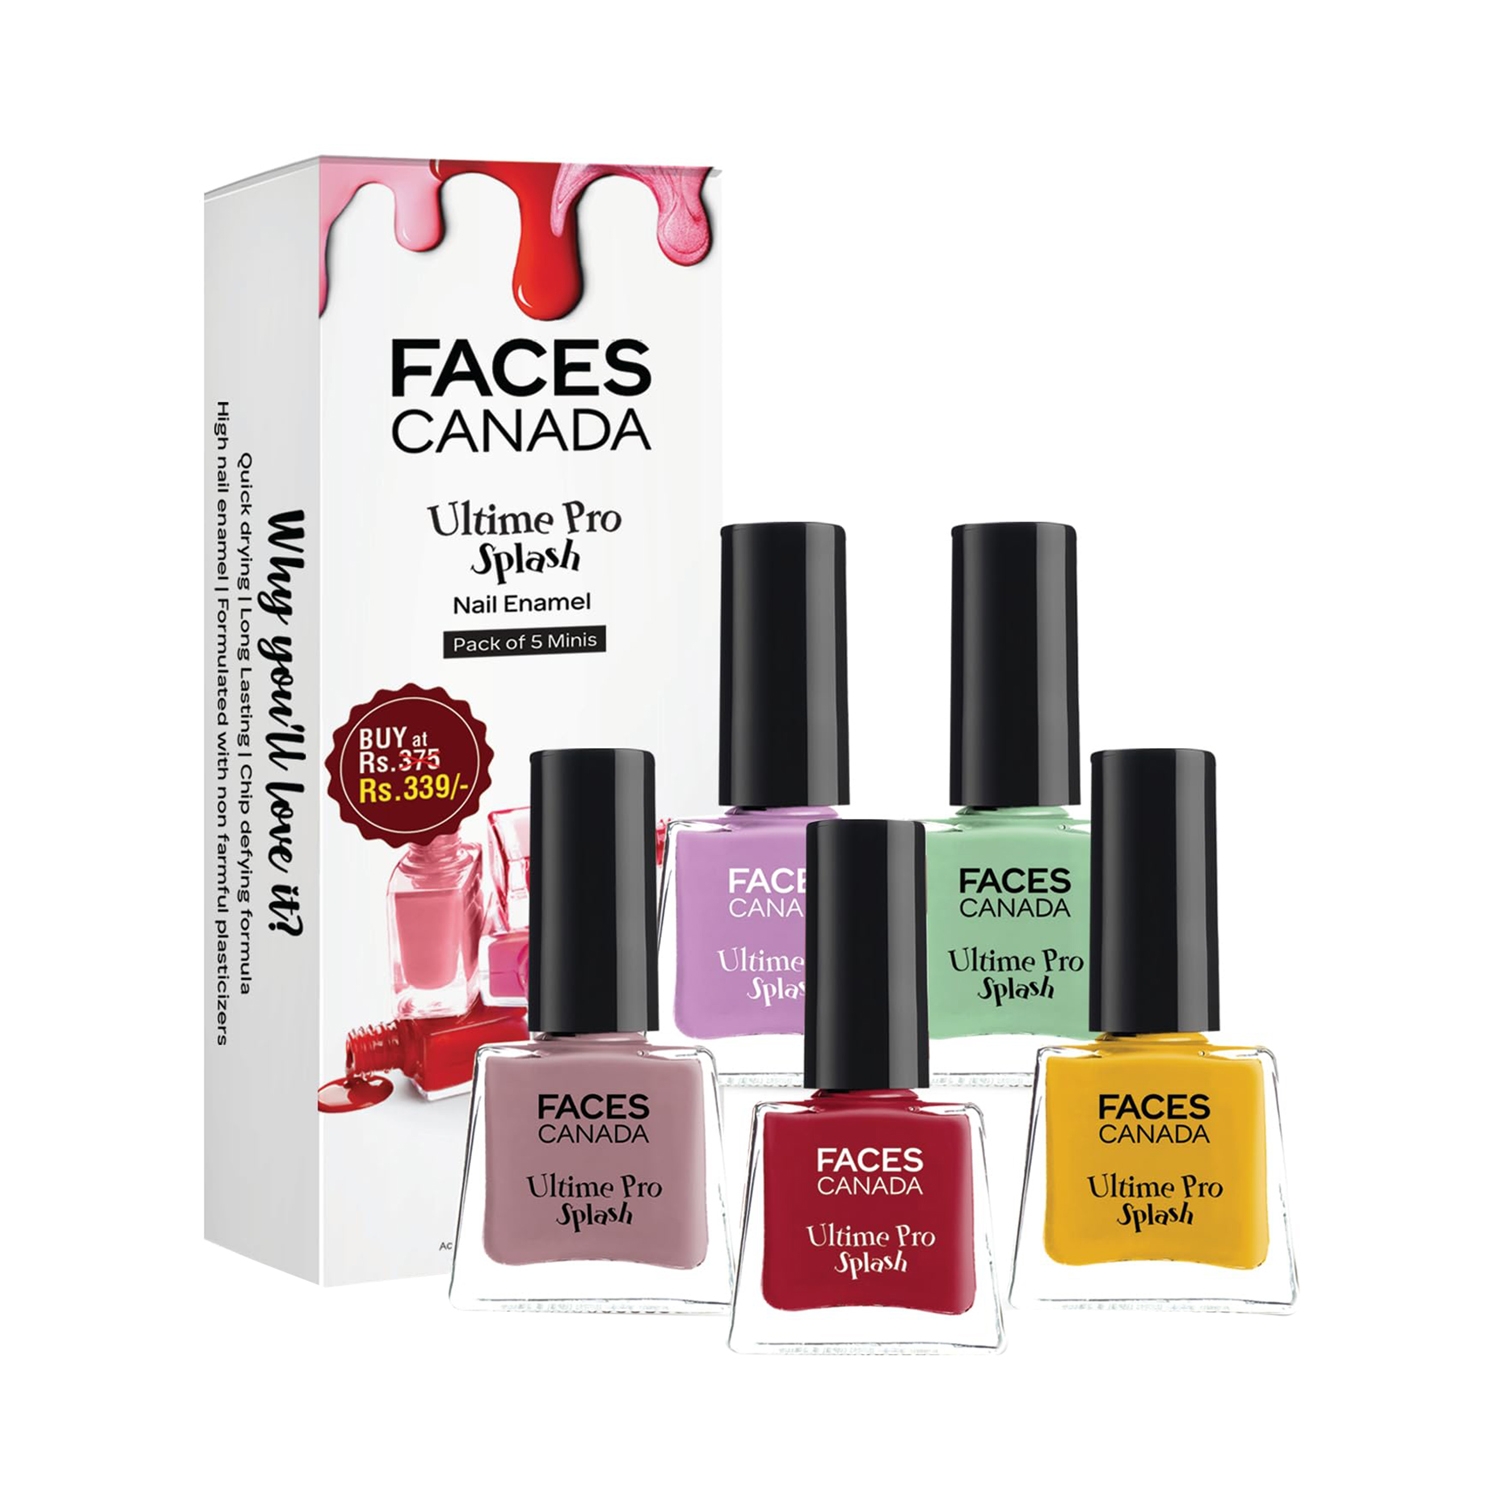 Faces Canada nail paint in Ballerina - Indian Beauty Forever-thanhphatduhoc.com.vn